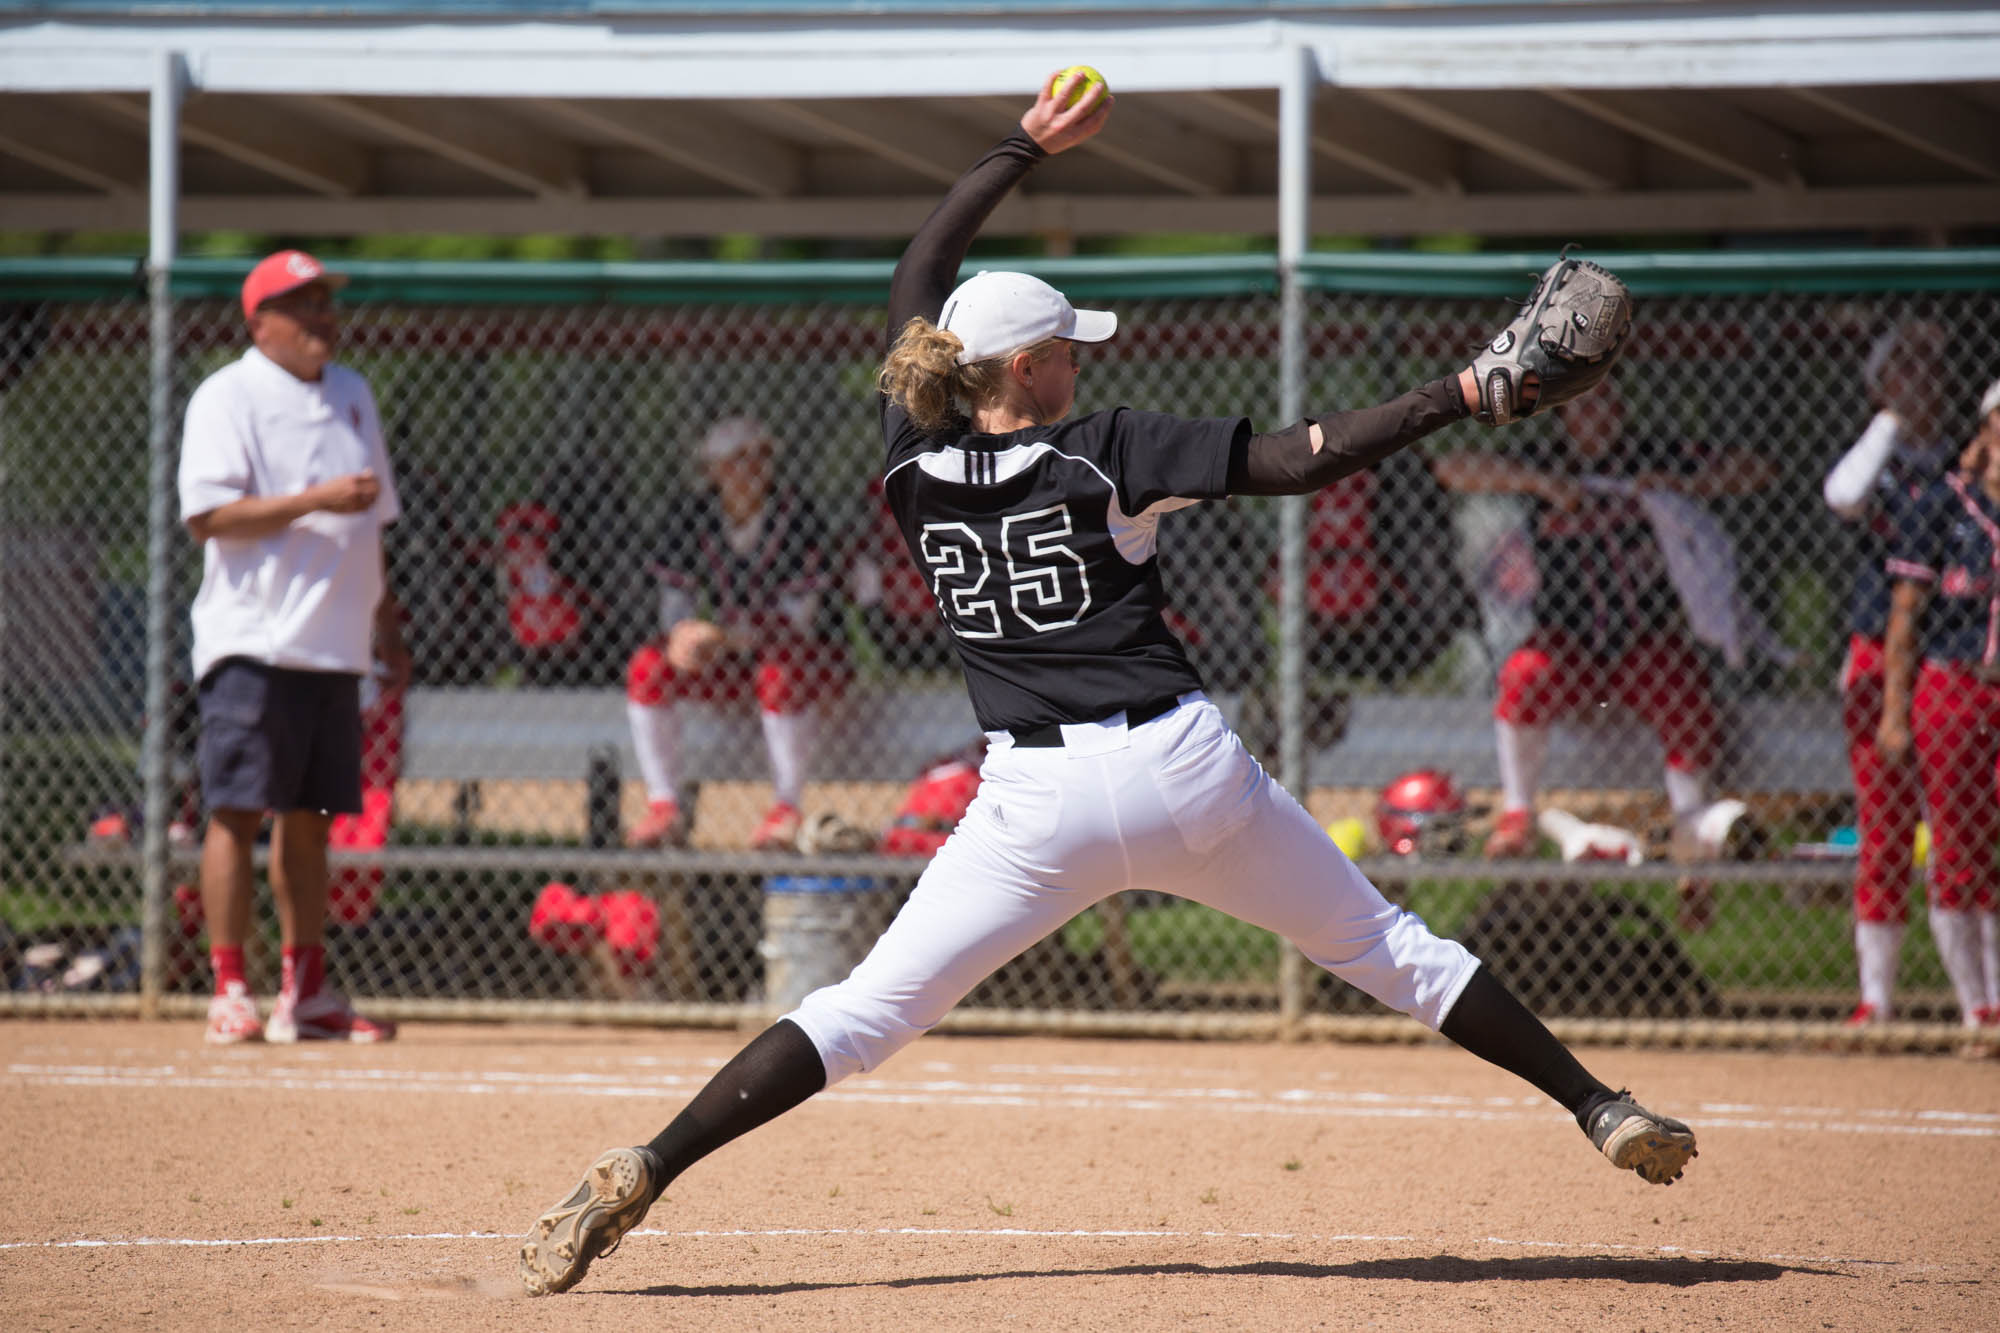 Female student athlete pitching a softball during a game.